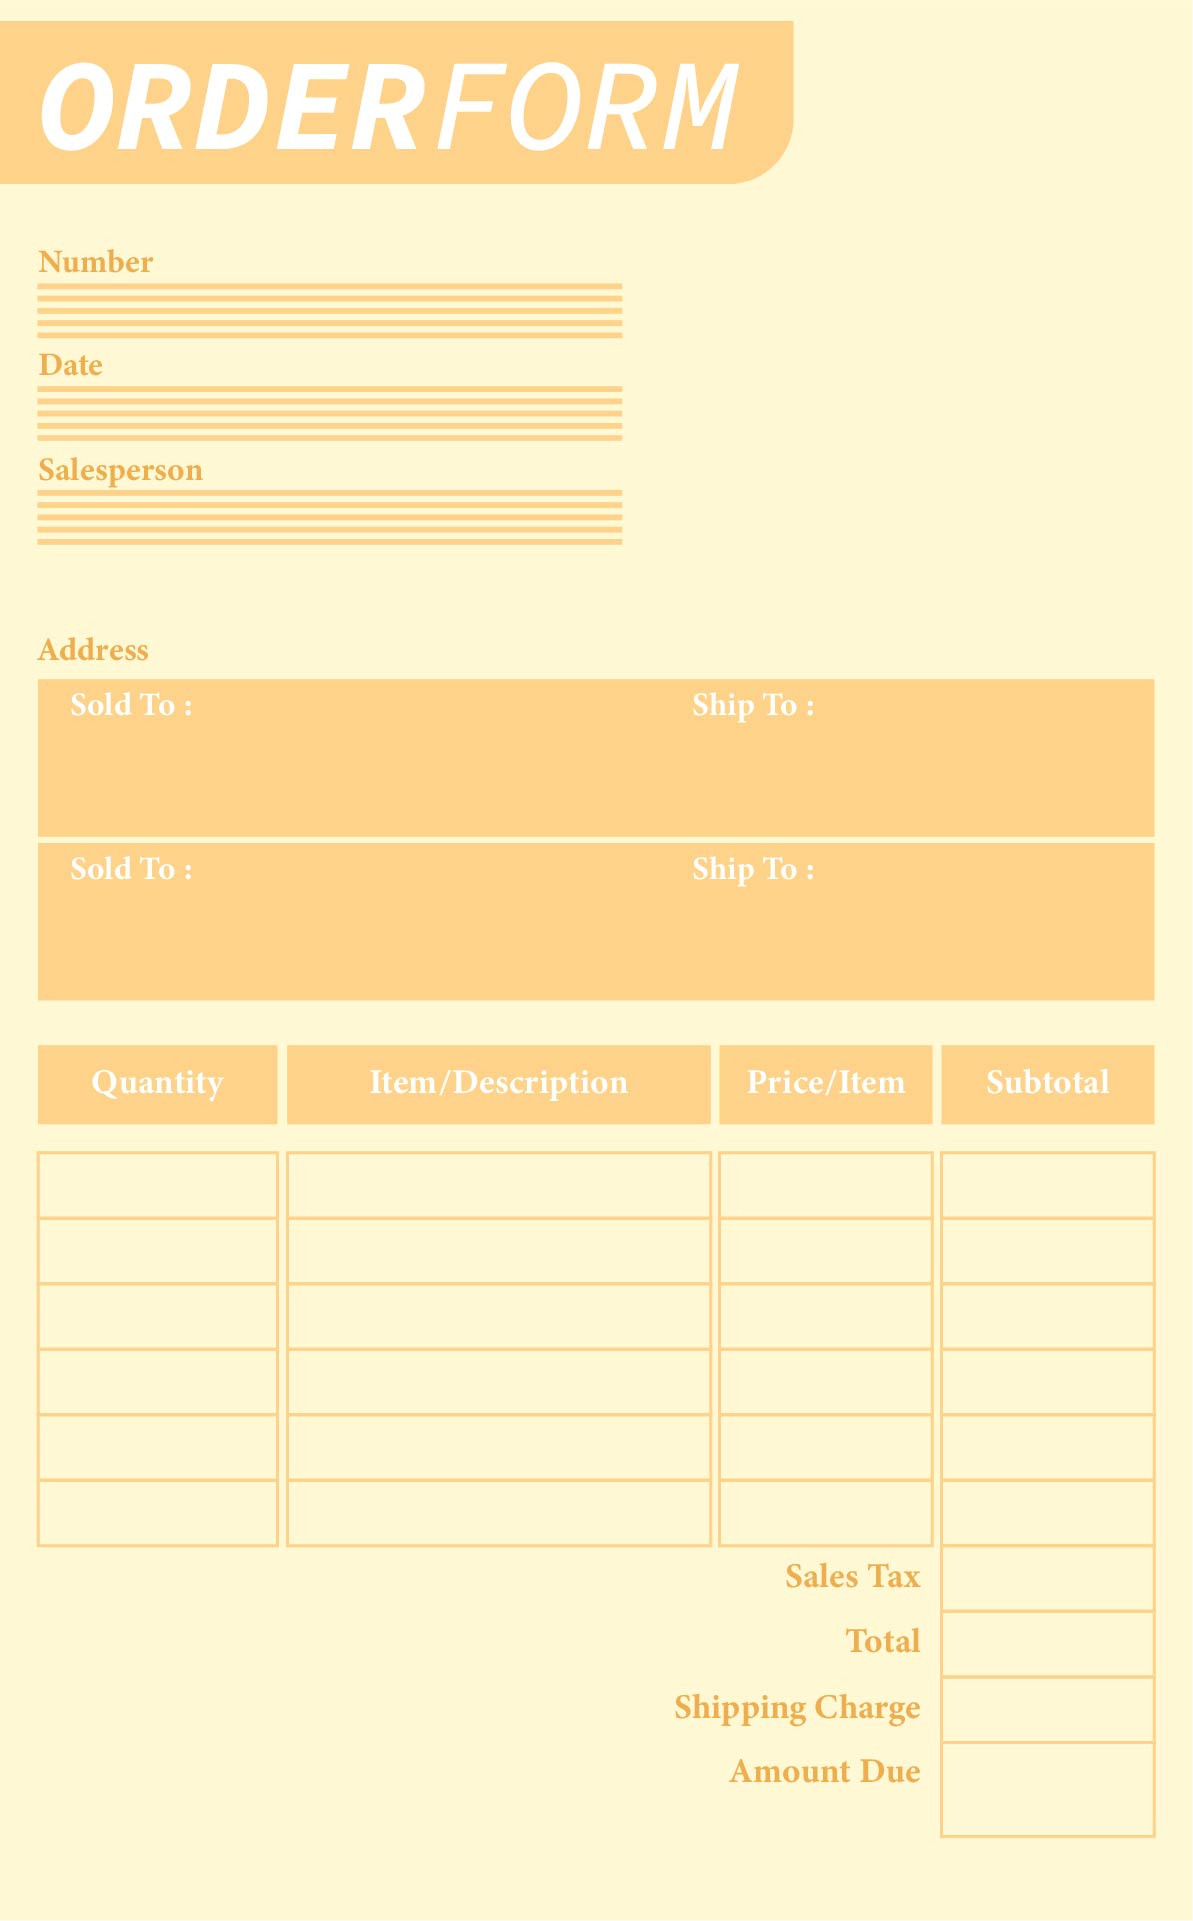 Blank order form Template 9 Best Of Free Printable Blank order forms Free